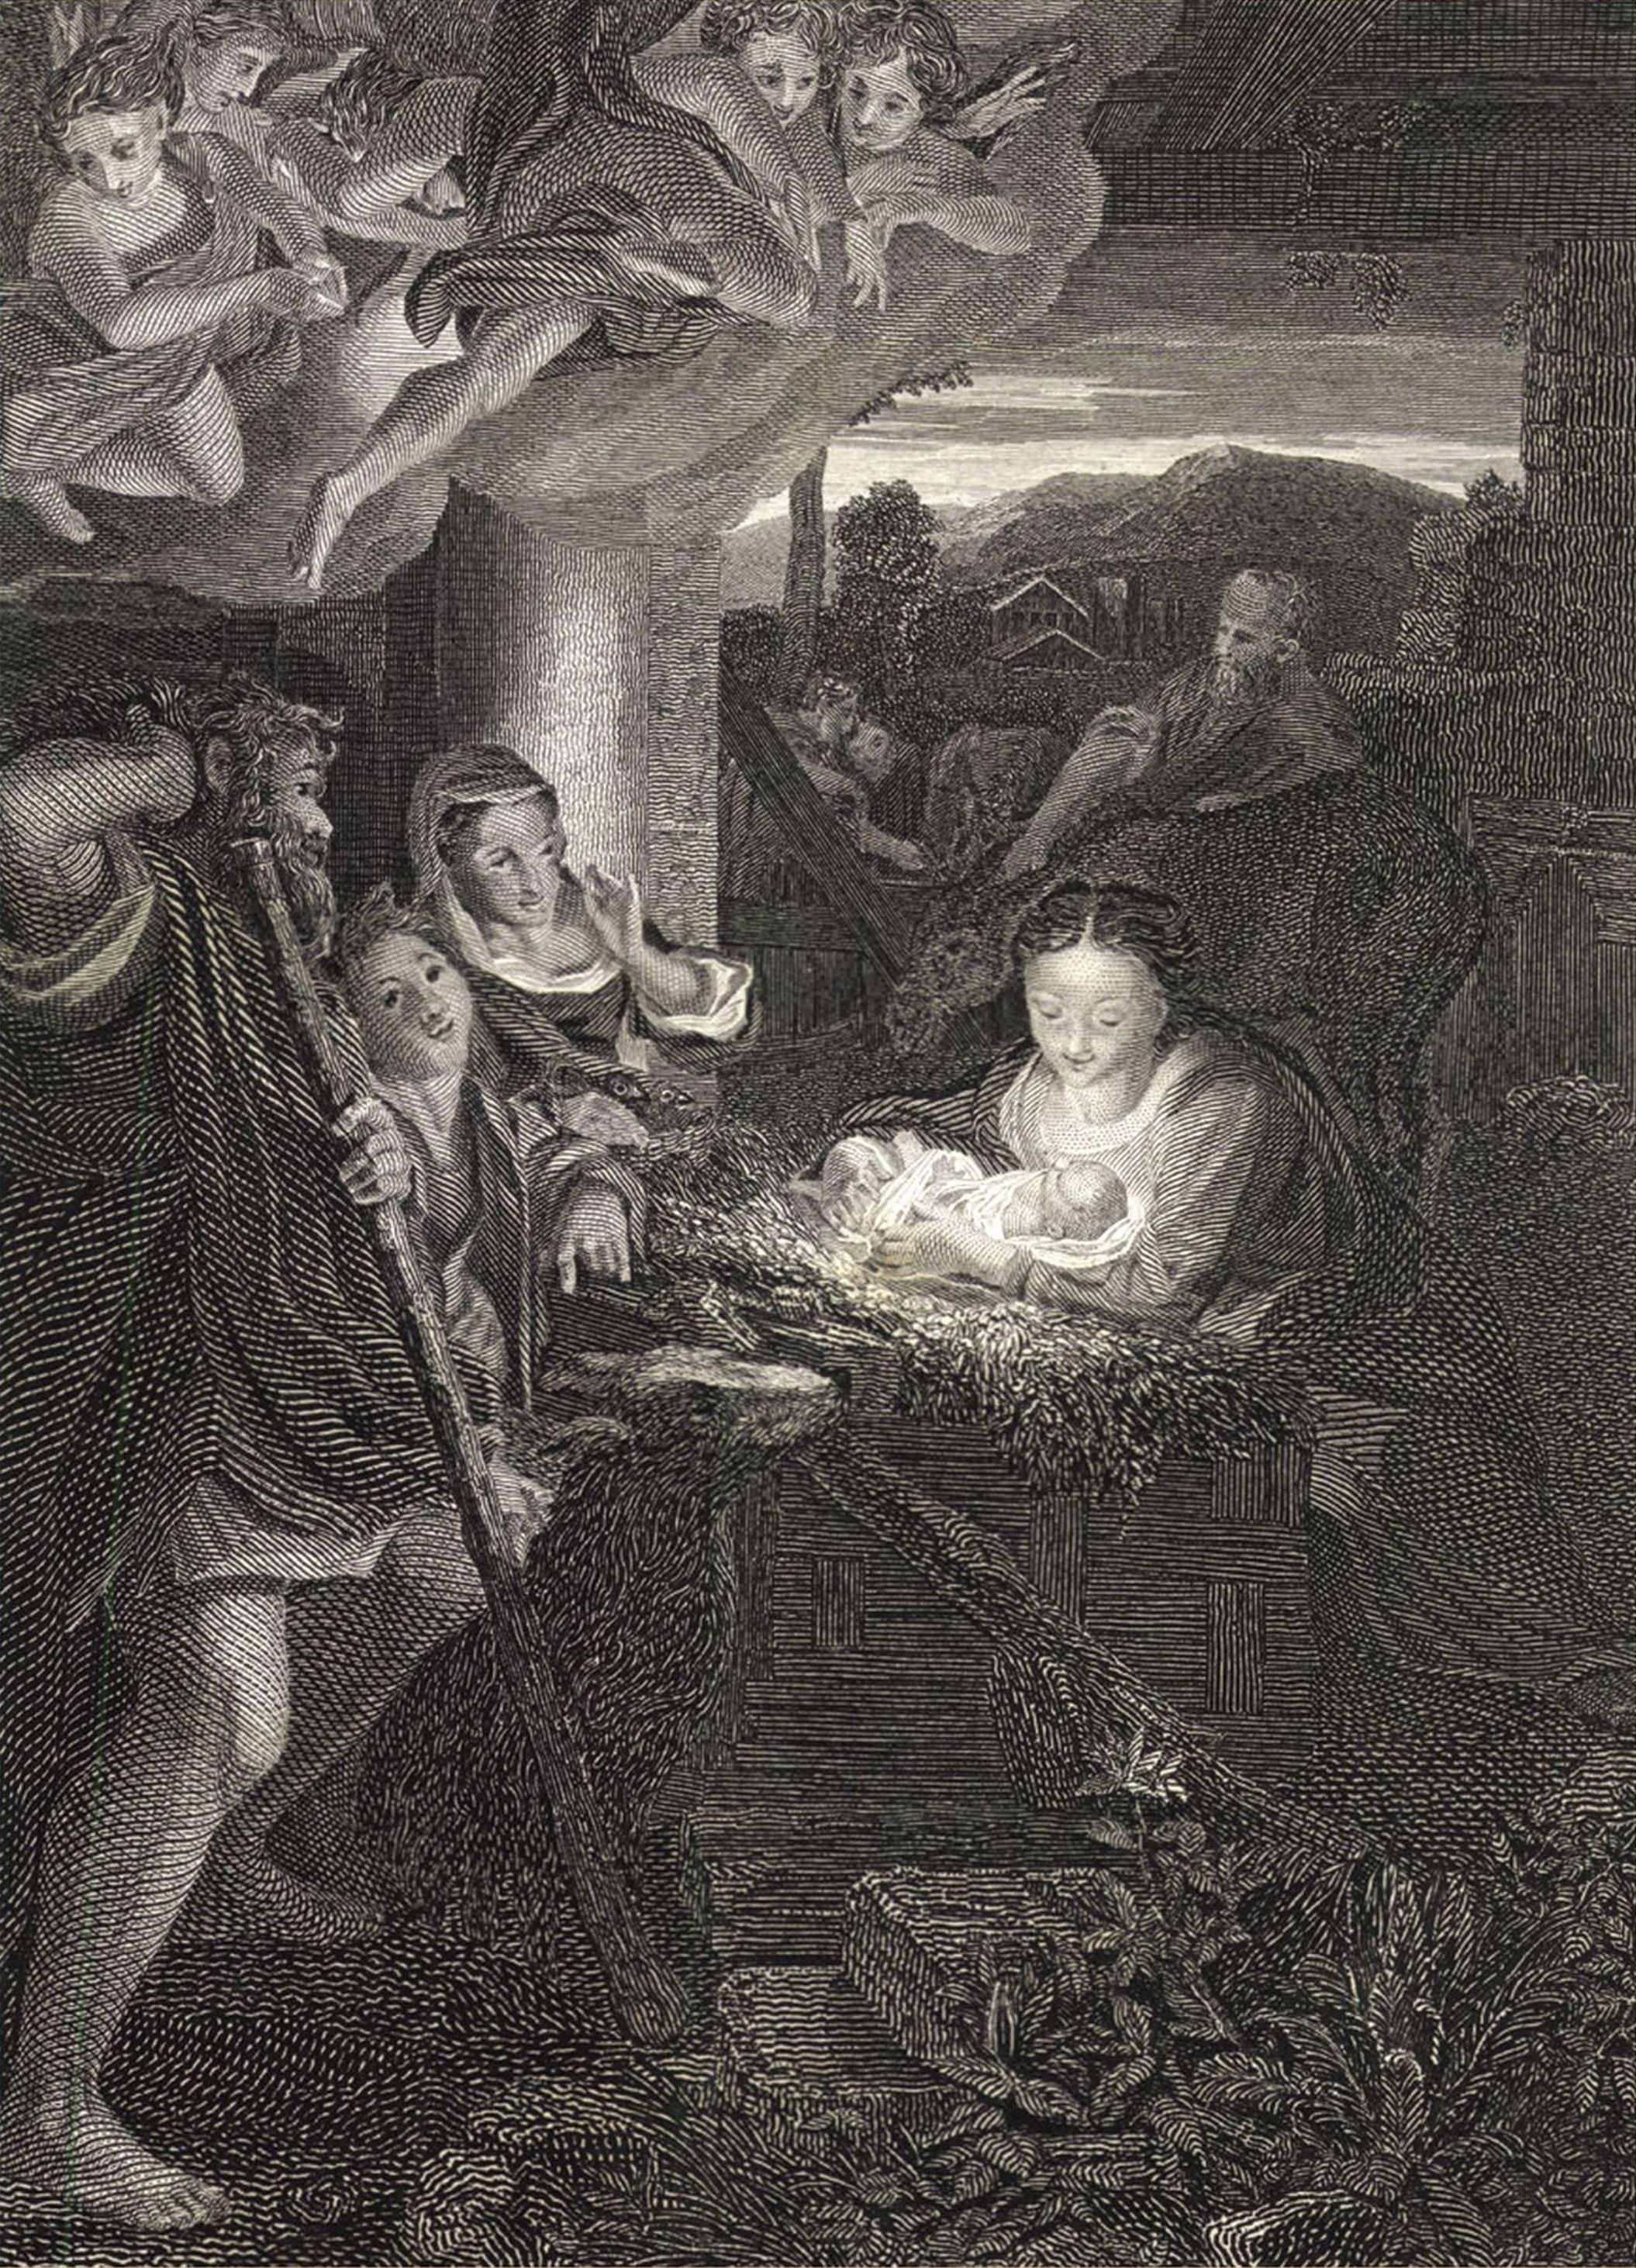 KEP 03452 The birth of Christ (engraving)